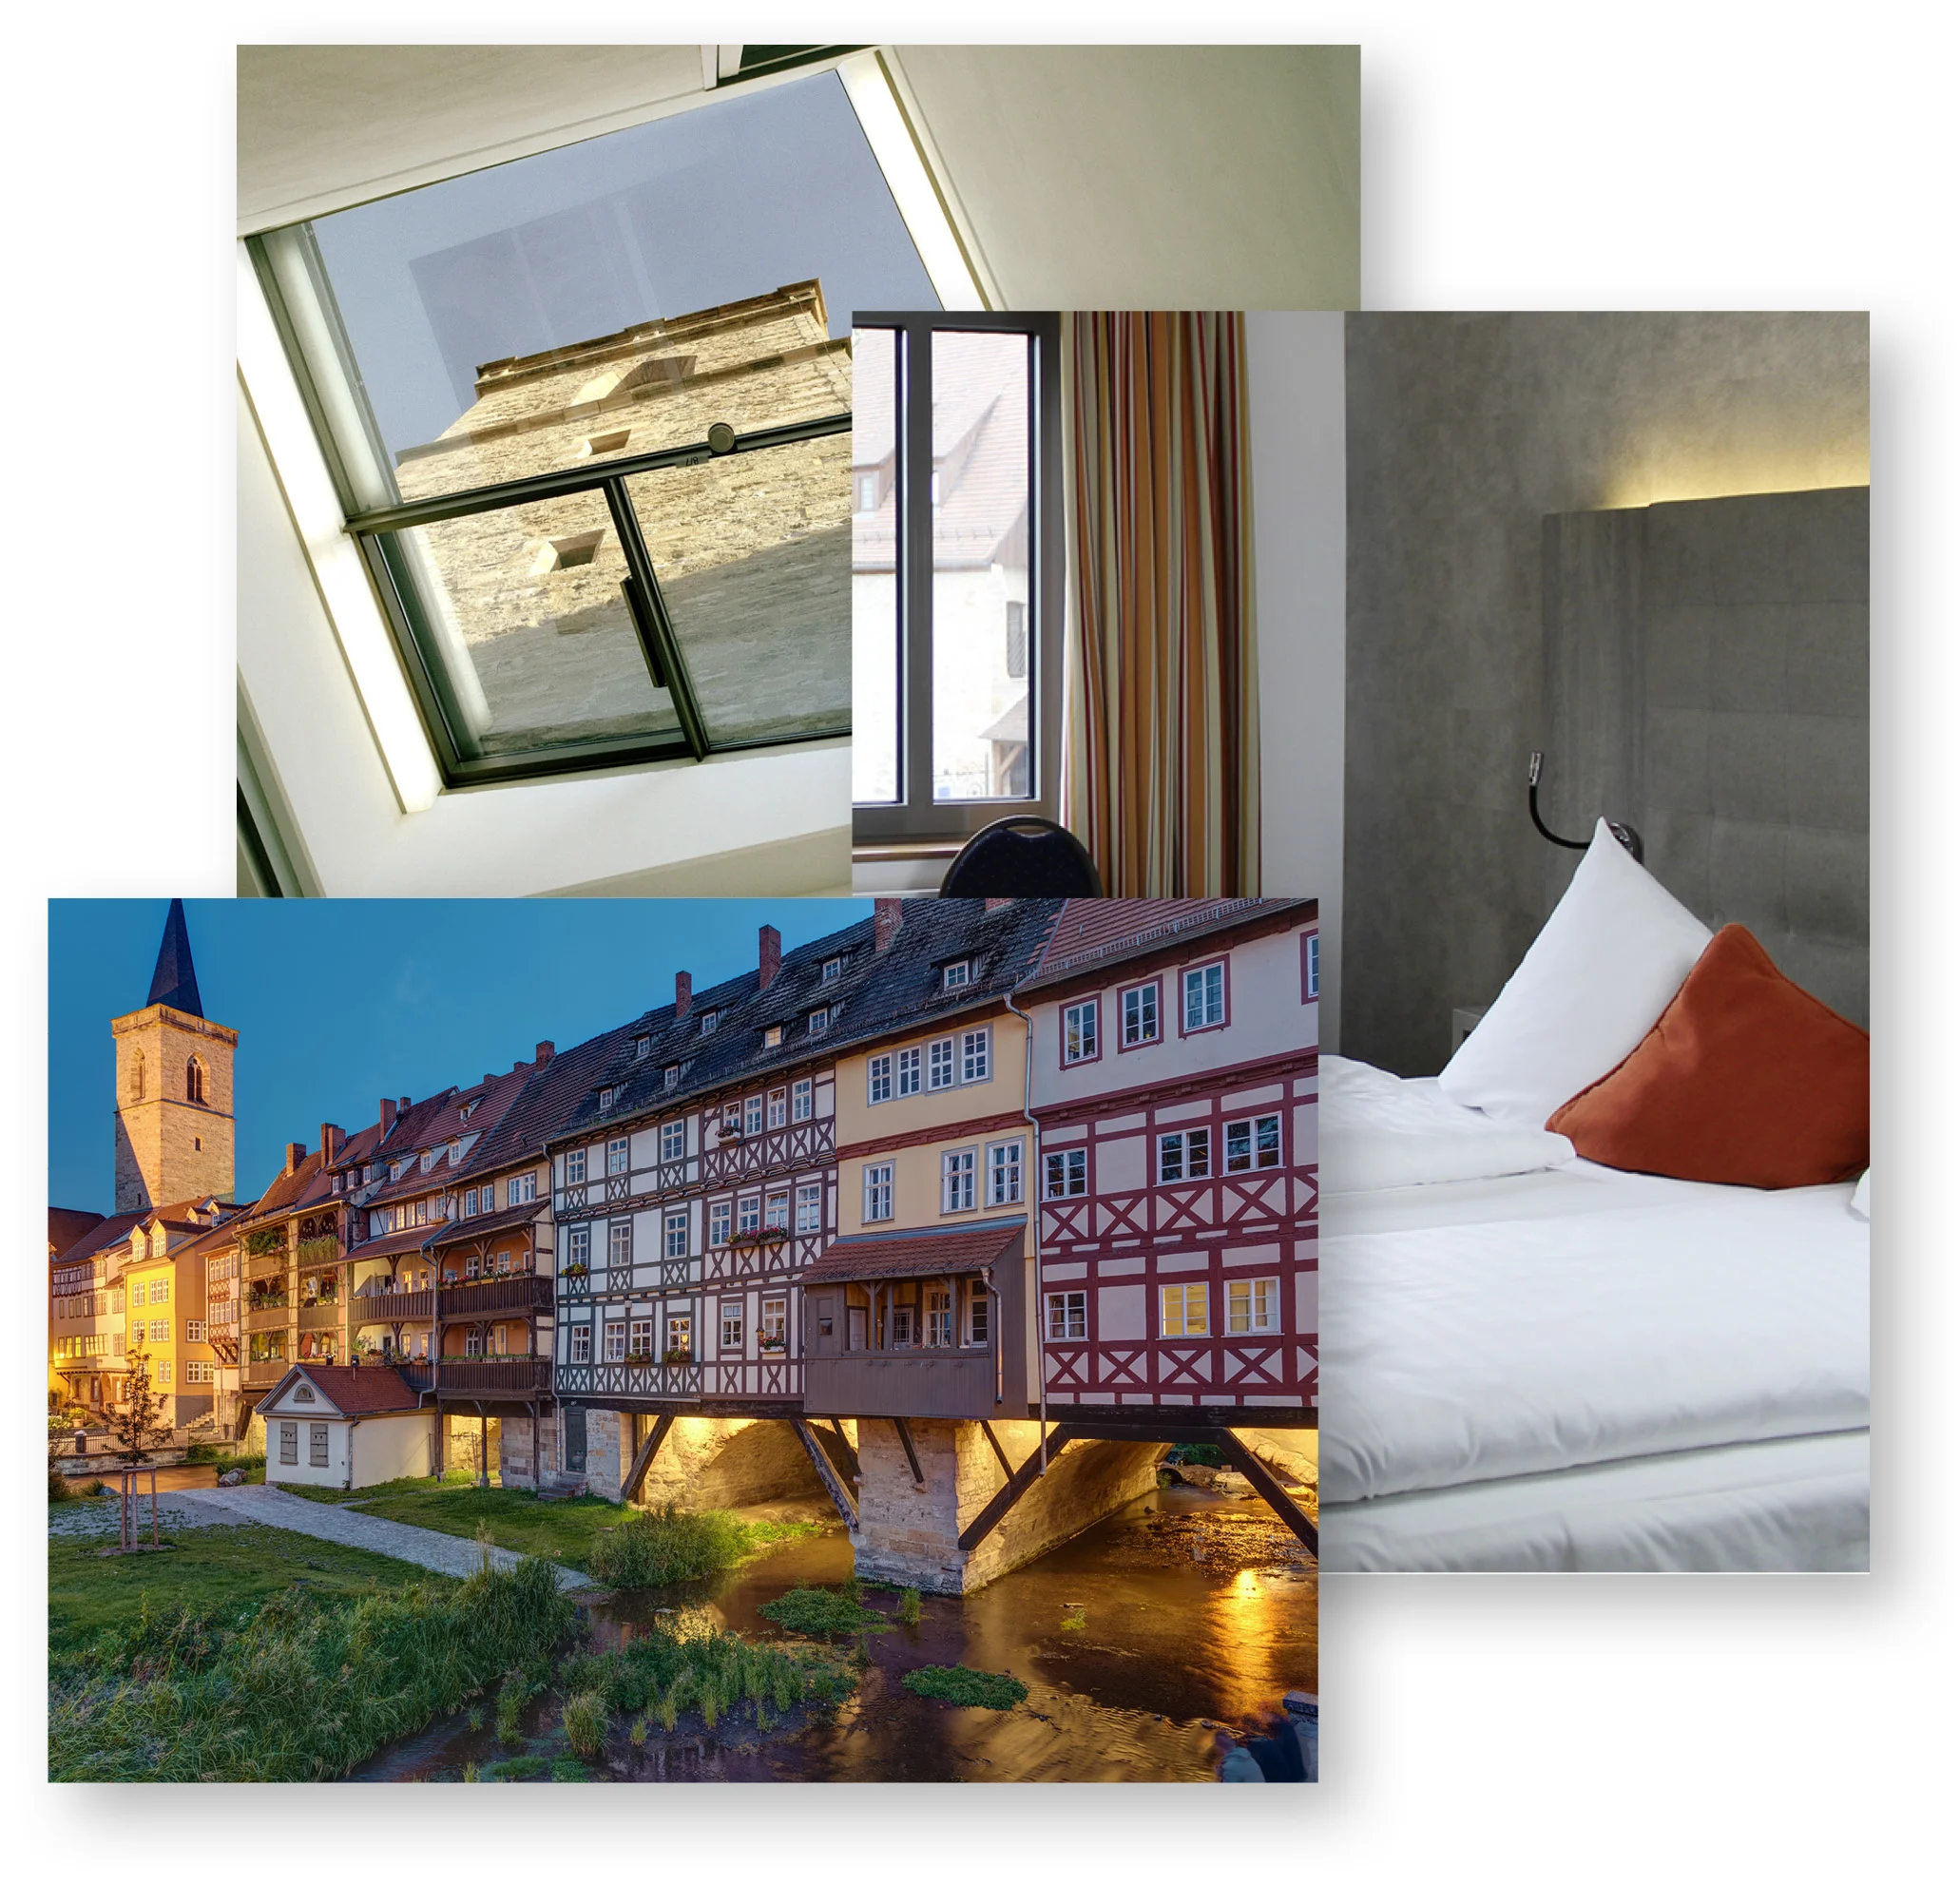 Stay in our wonderful accommodation by the Merchants' Bridge in Erfurt